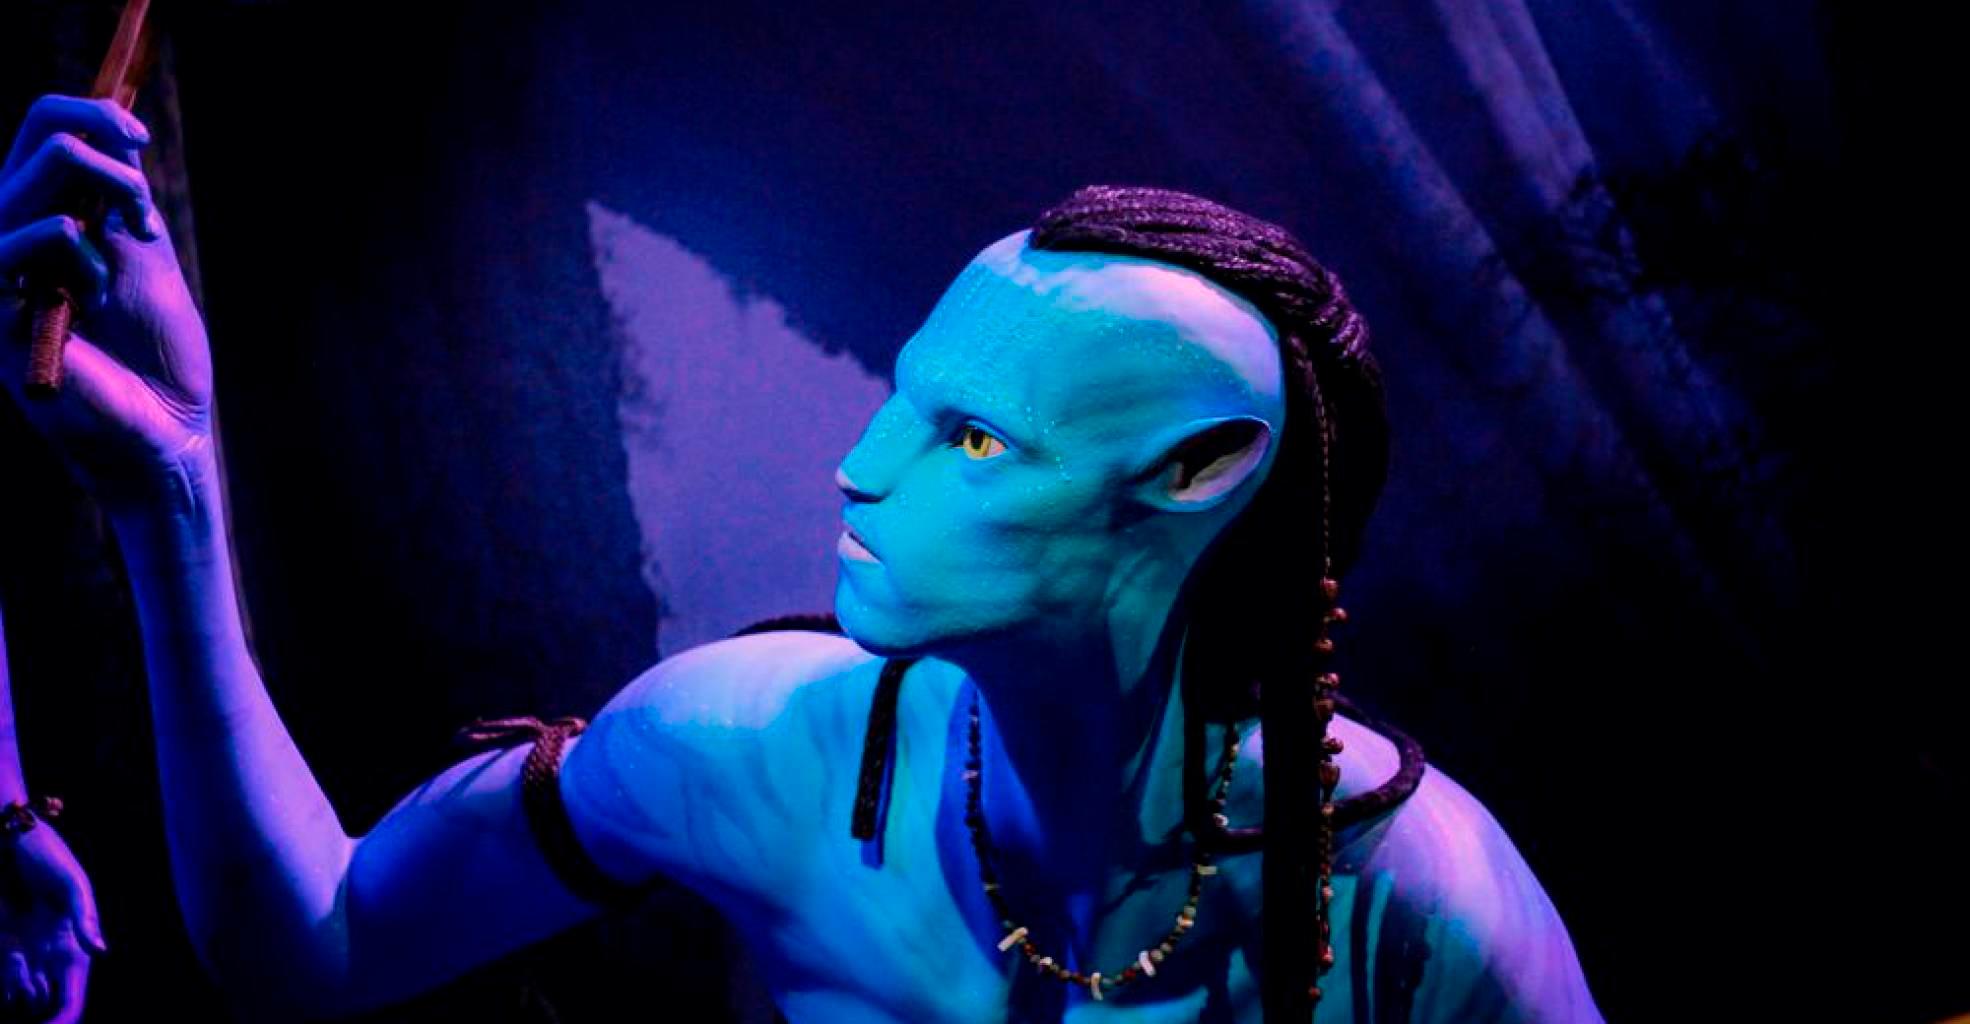 “Avatar” could once again be the biggest grossing film in history